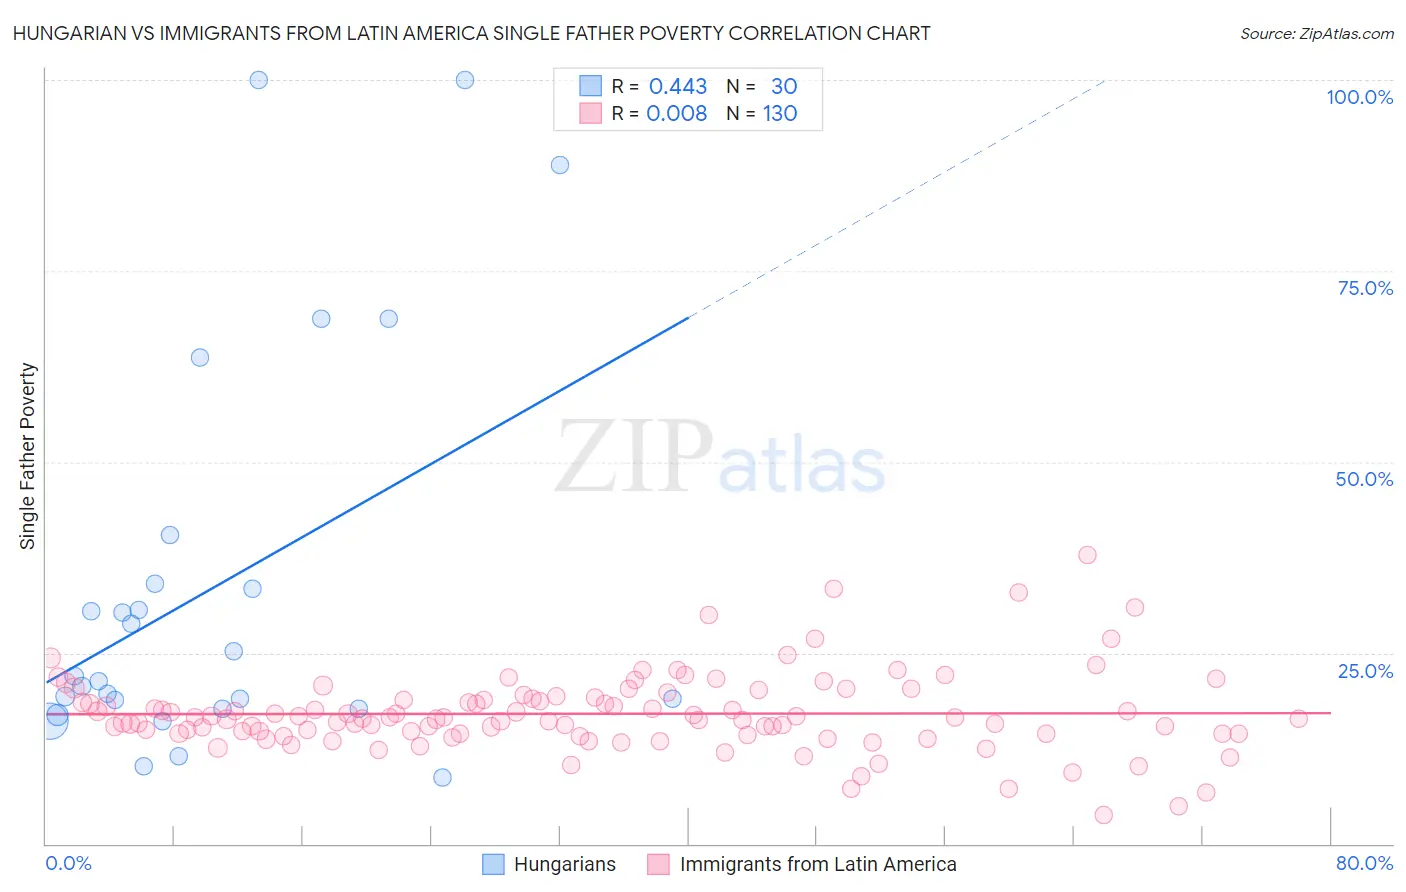 Hungarian vs Immigrants from Latin America Single Father Poverty